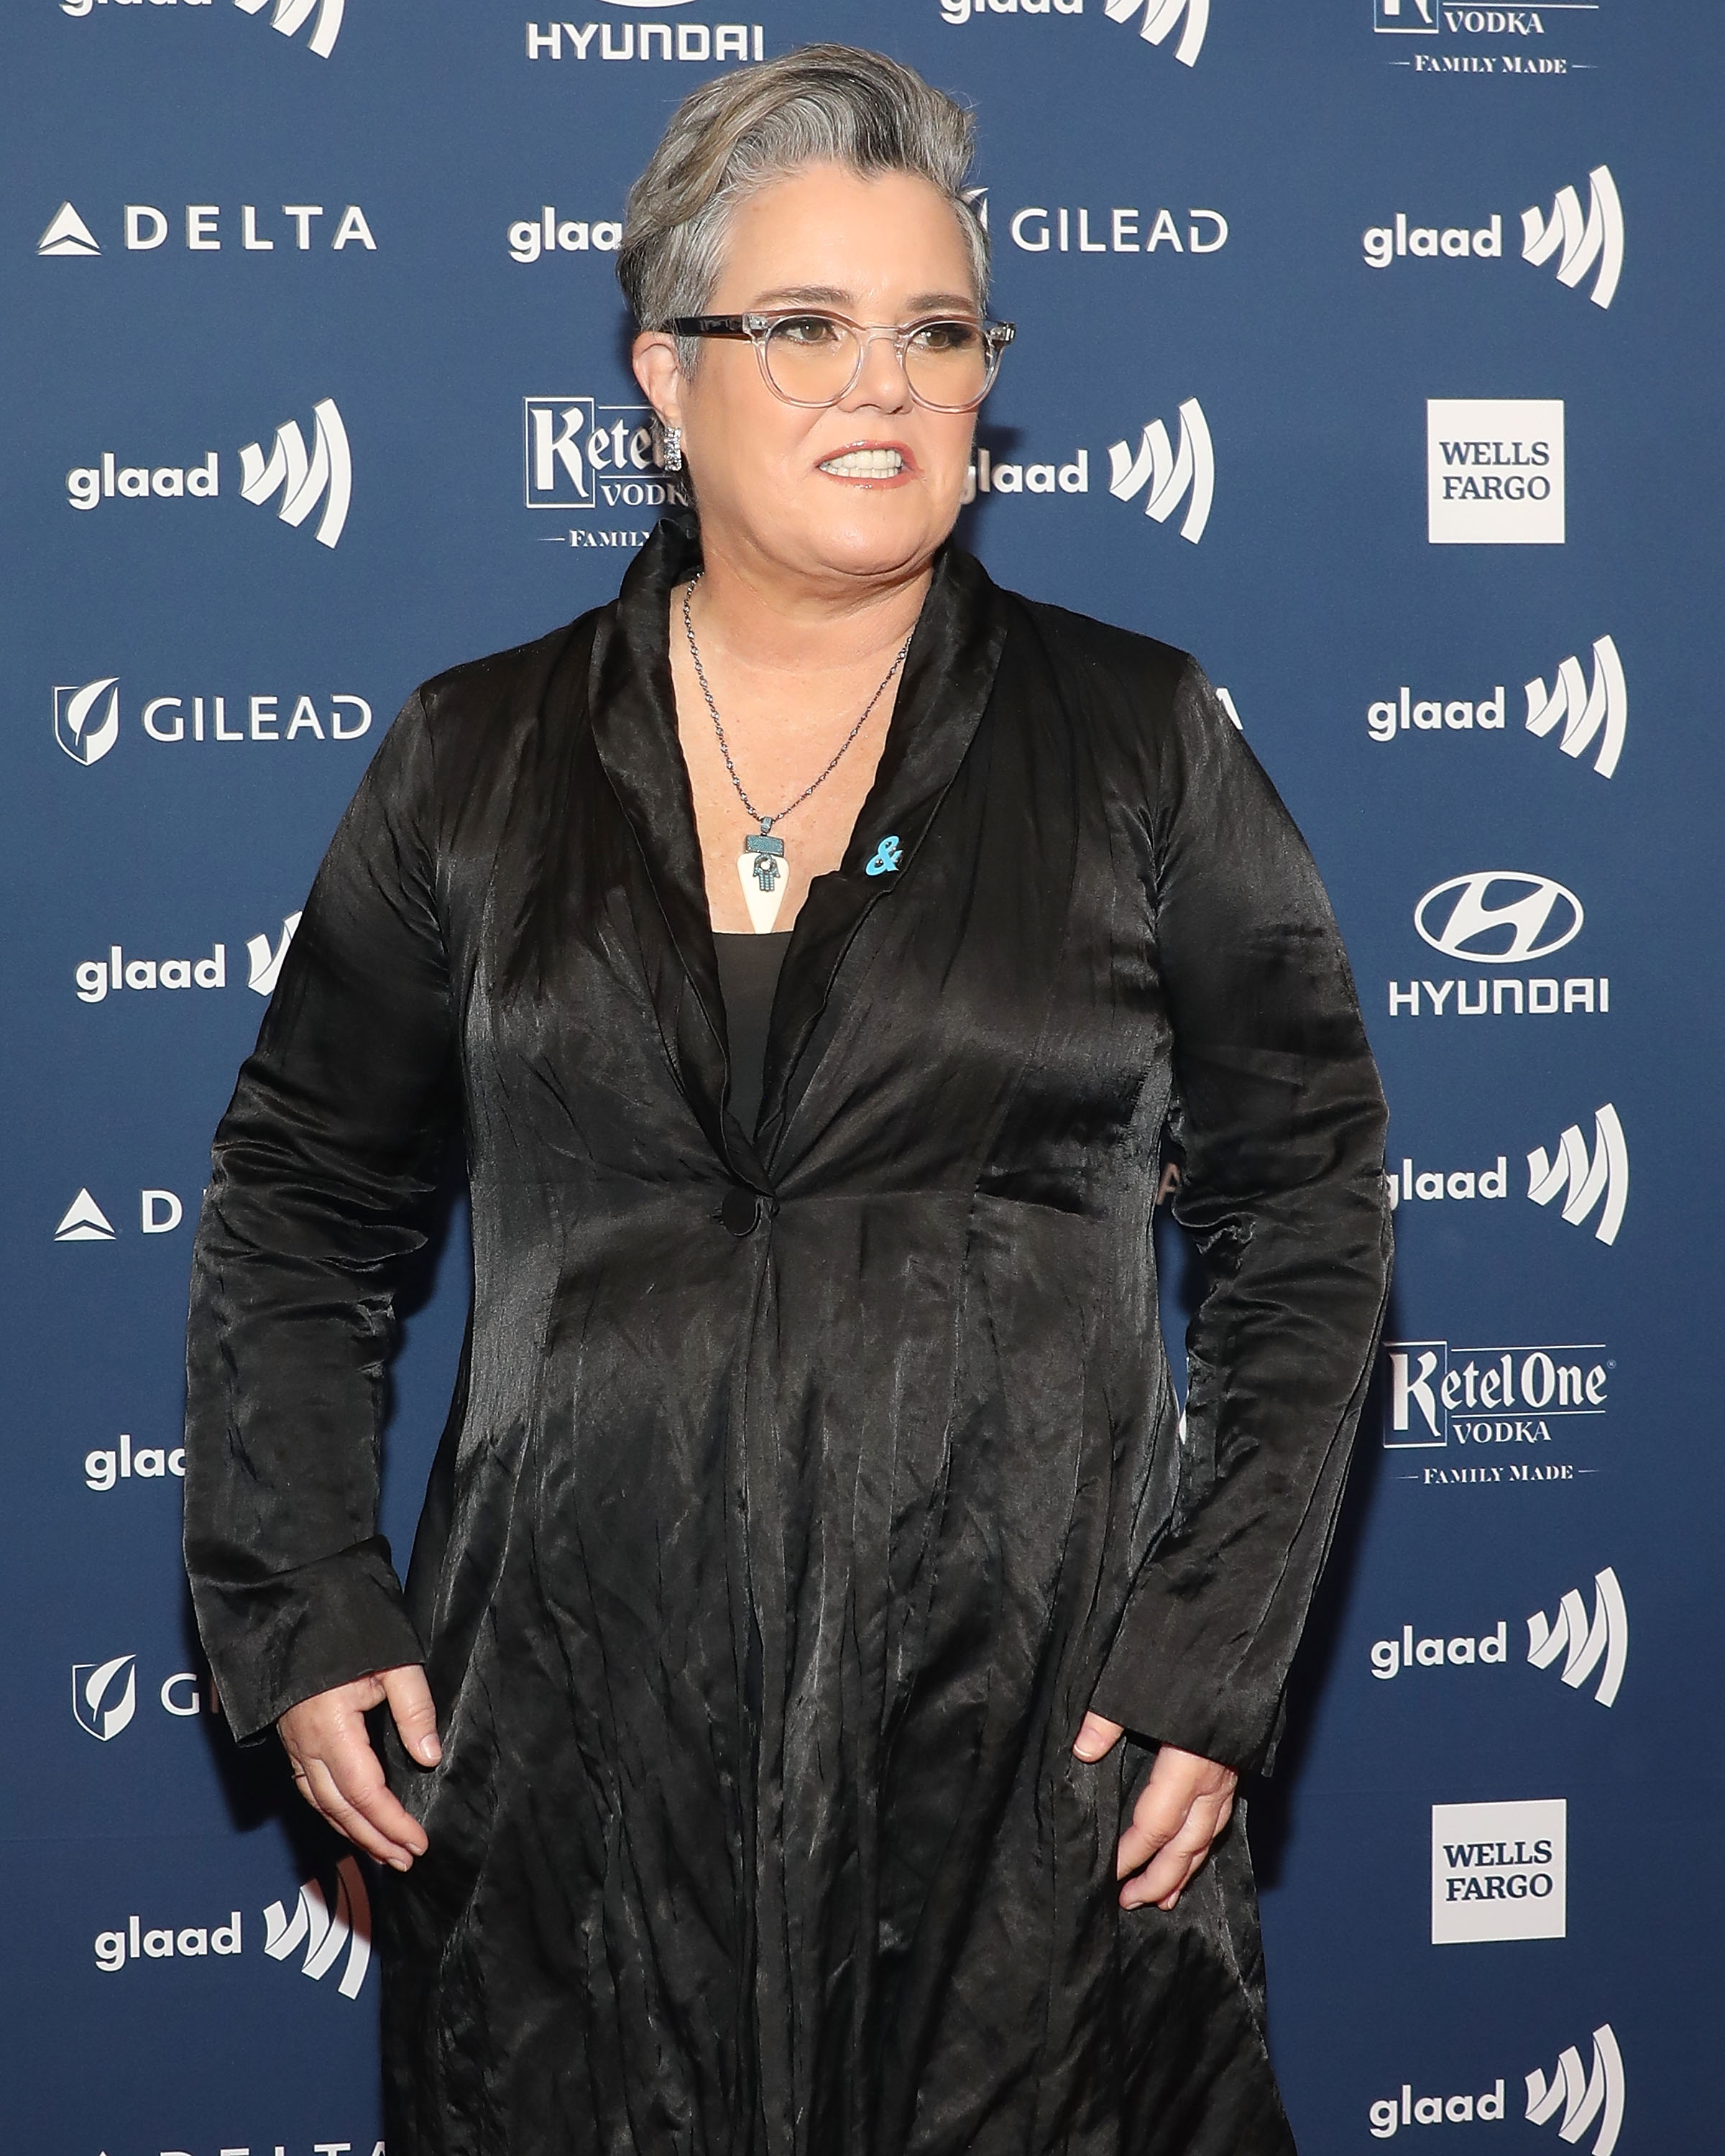 Rosie O'Donnell attends the GLAAD Media Awards in New York City on May 4, 2019 | Photo: Getty Images